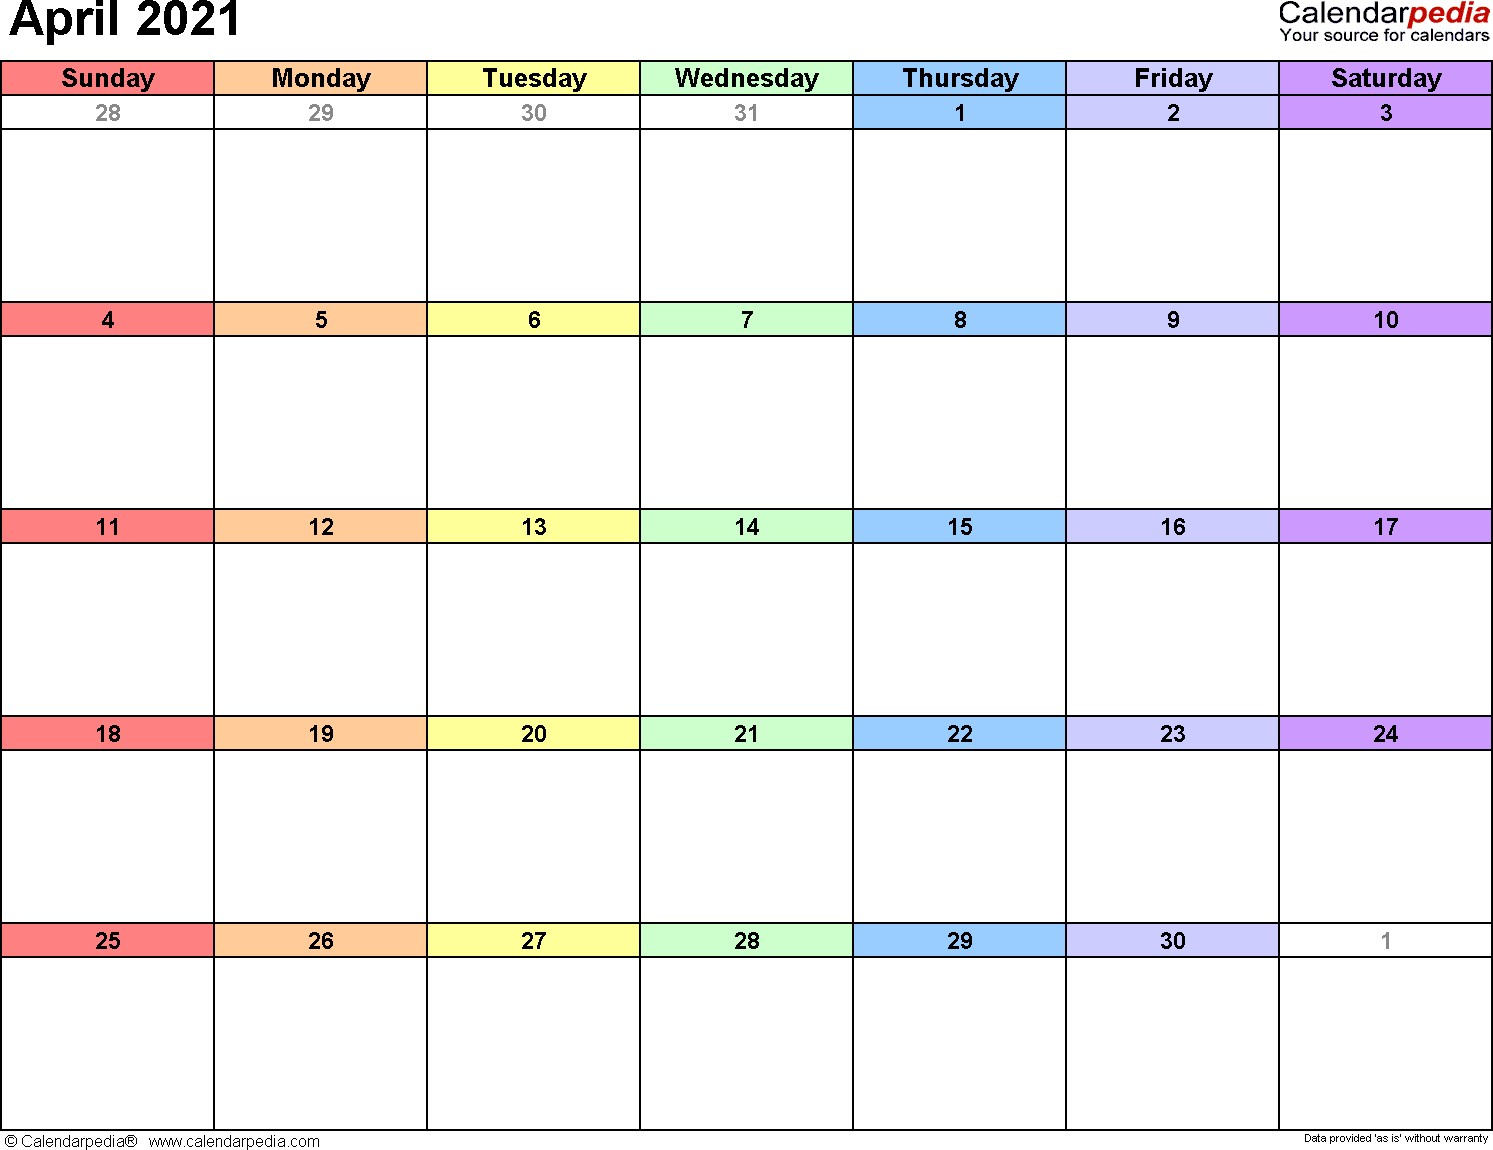 April 2021 calendar templates for Word Excel and PDF